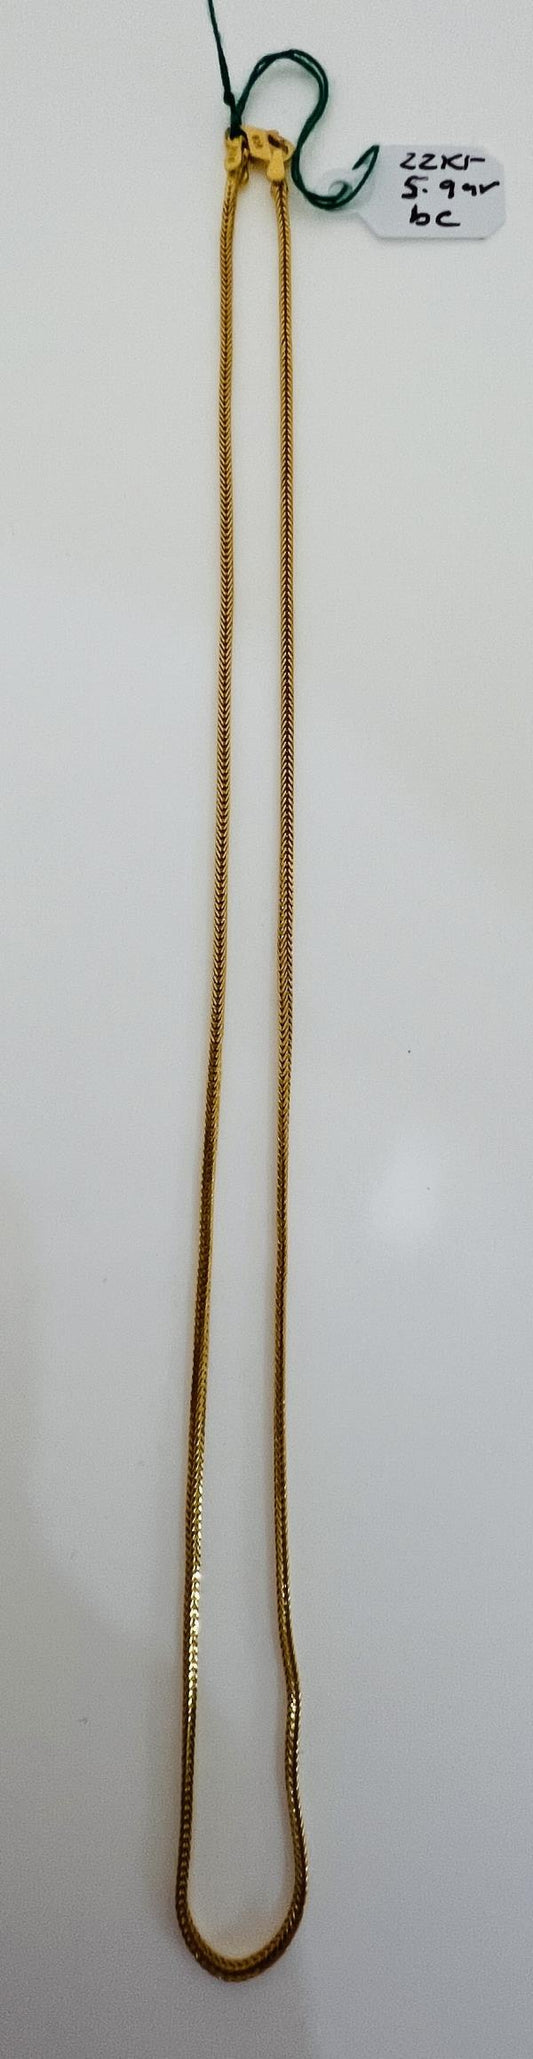 22KT GOLD CHAIN 15" 5.9GM